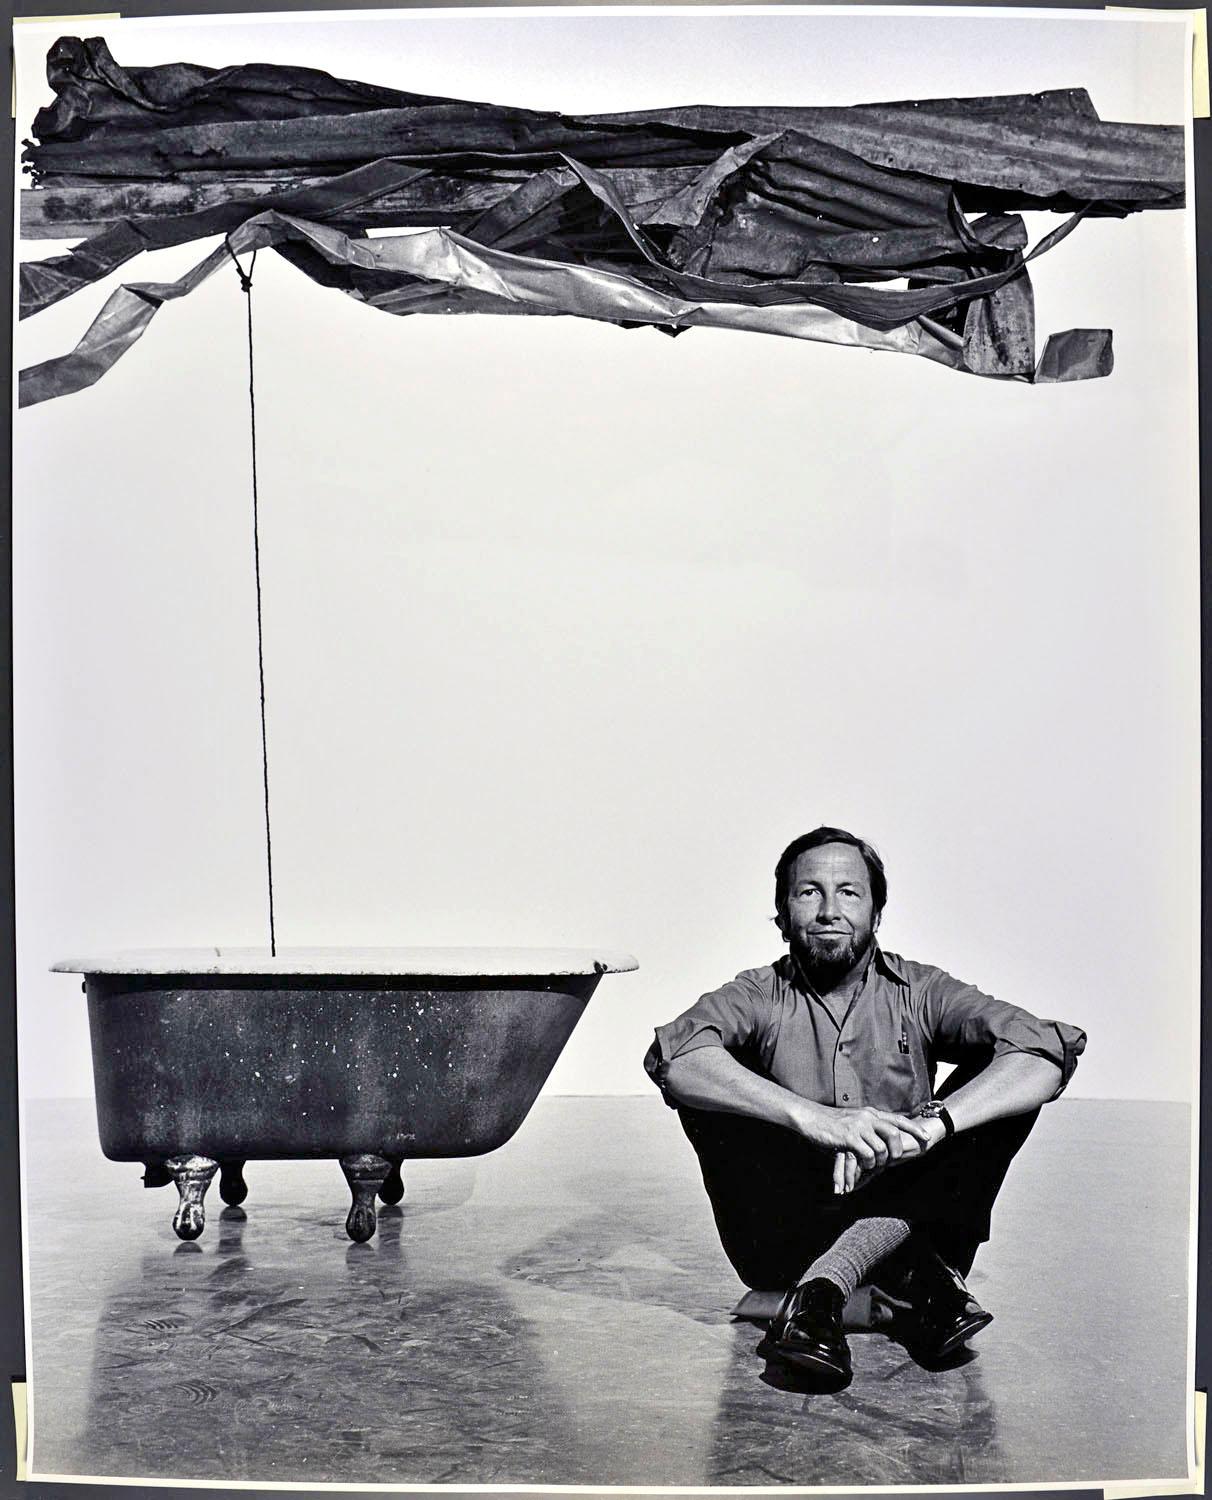 Jack Mitchell Black and White Photograph - 16 x 20" Artist Robert Rauschenberg at MOMA with 'Sor Aqua', signed by Mitchell